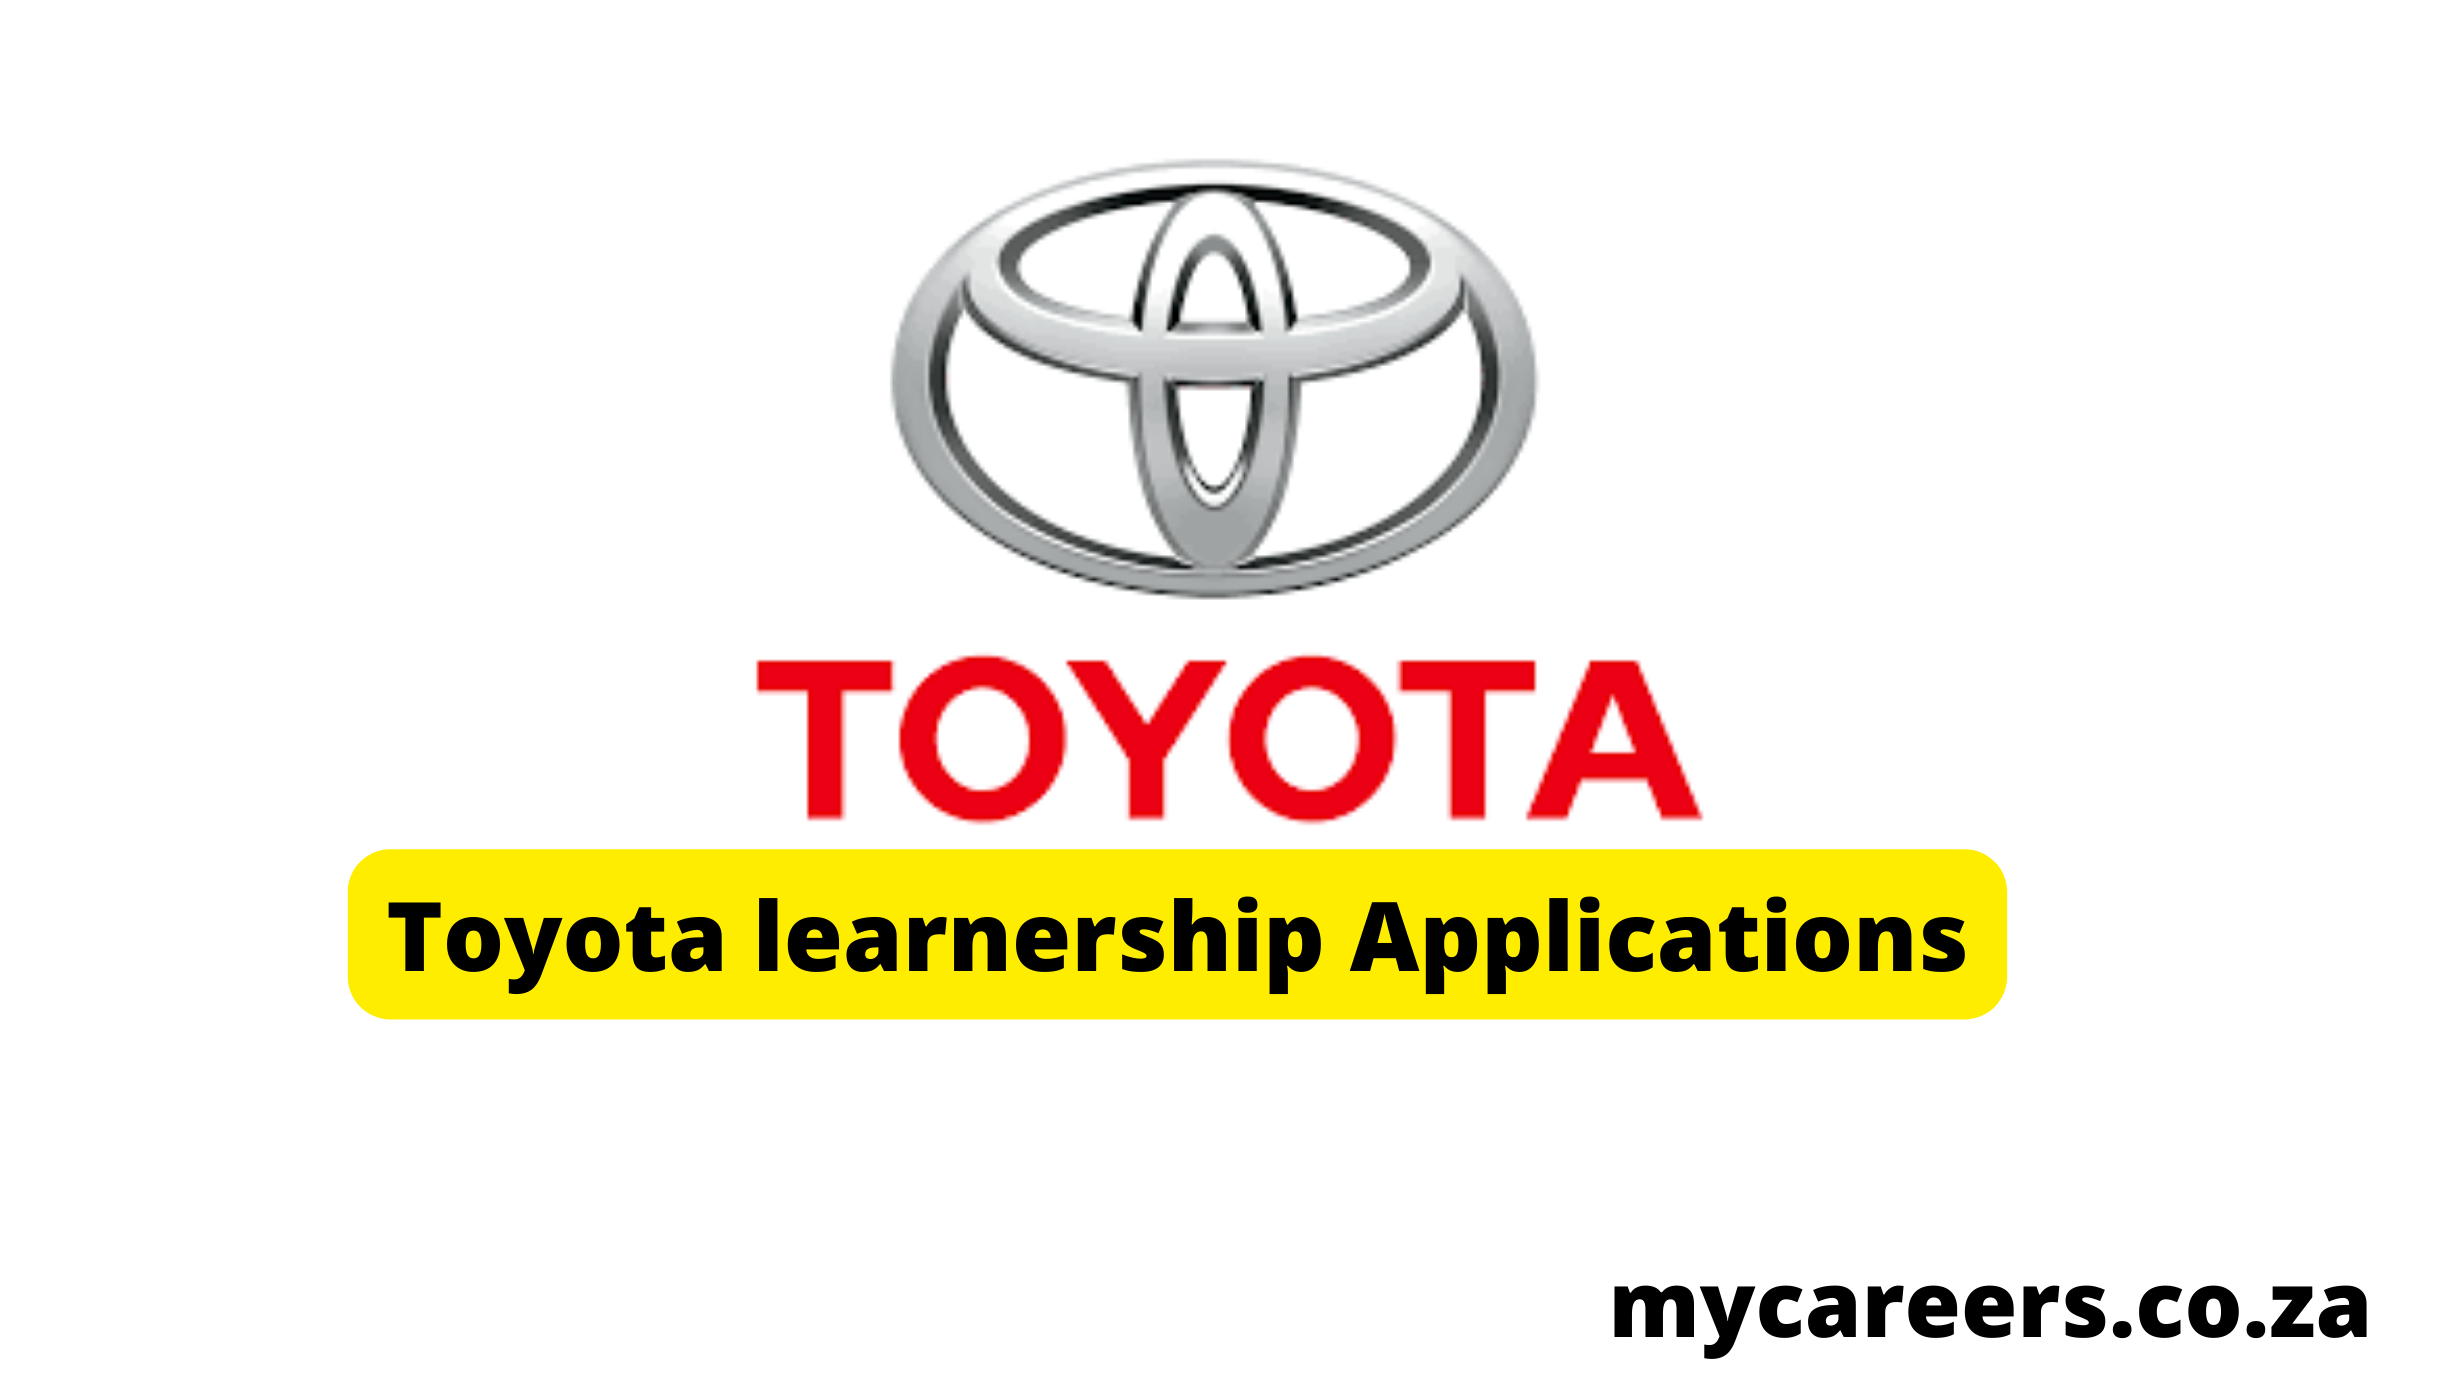 Toyota learnership Applications for year 2022 to 2023